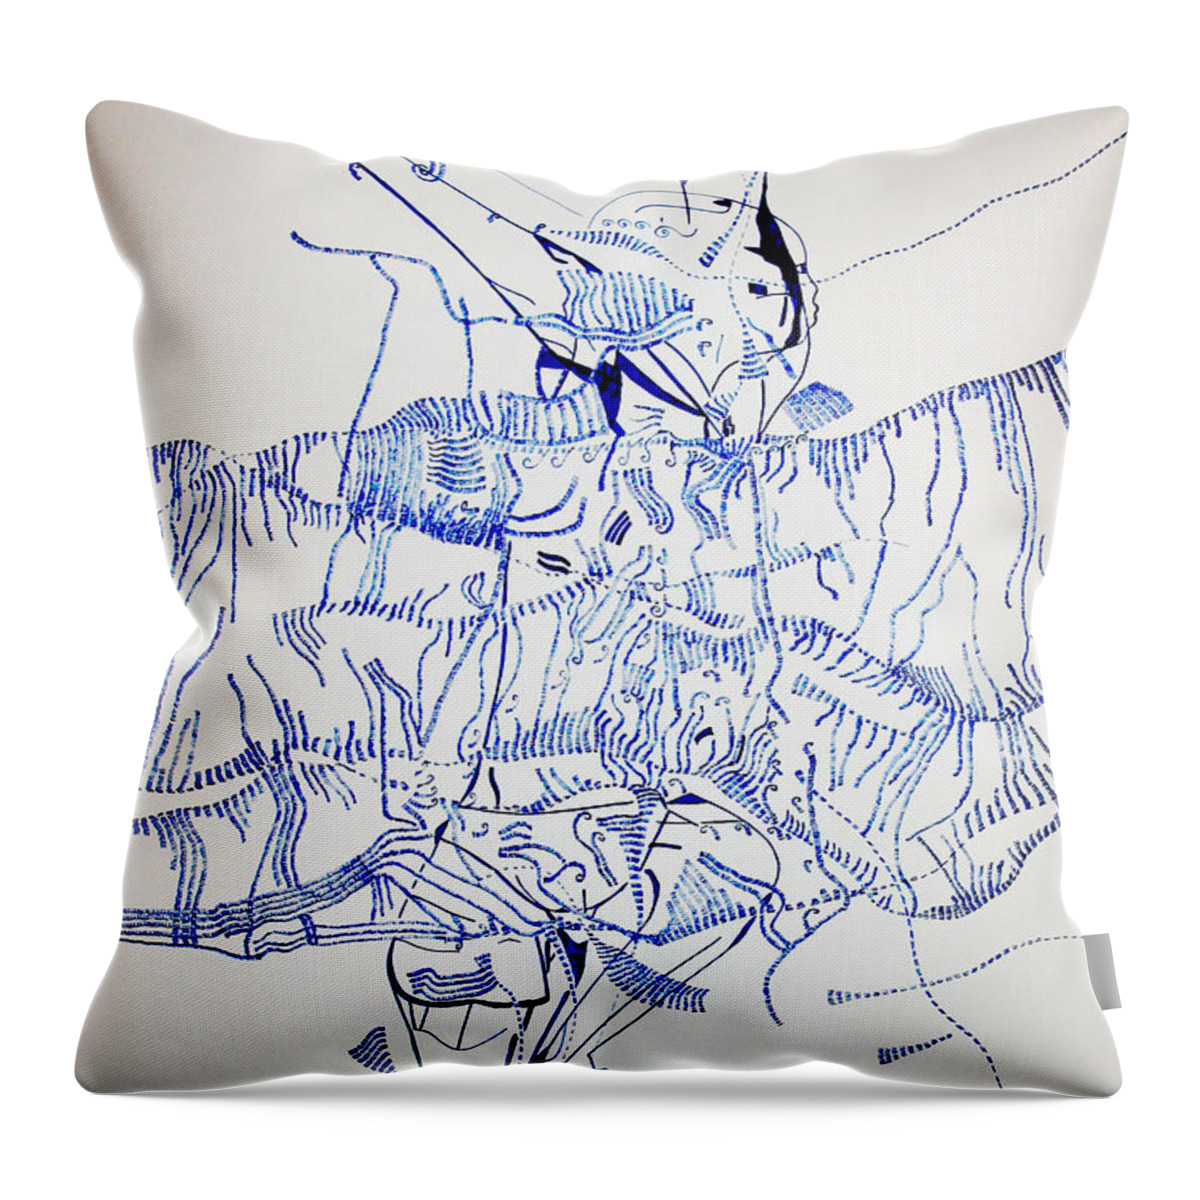 Jesus Throw Pillow featuring the painting Beach Volleyball by Gloria Ssali